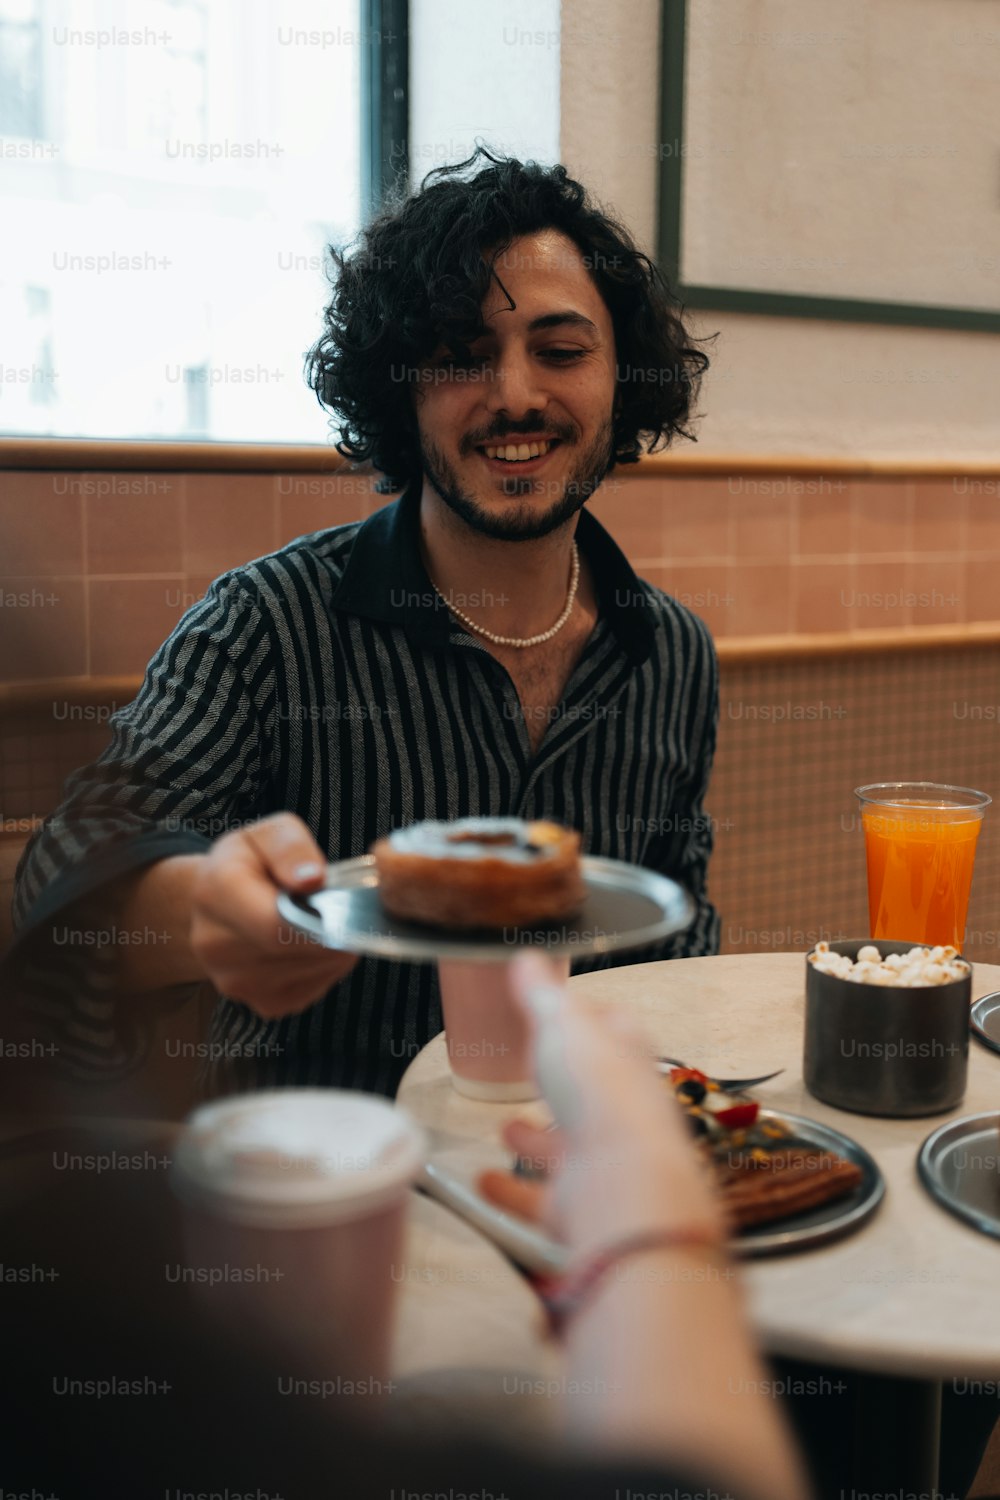 a man sitting at a table with a plate of food